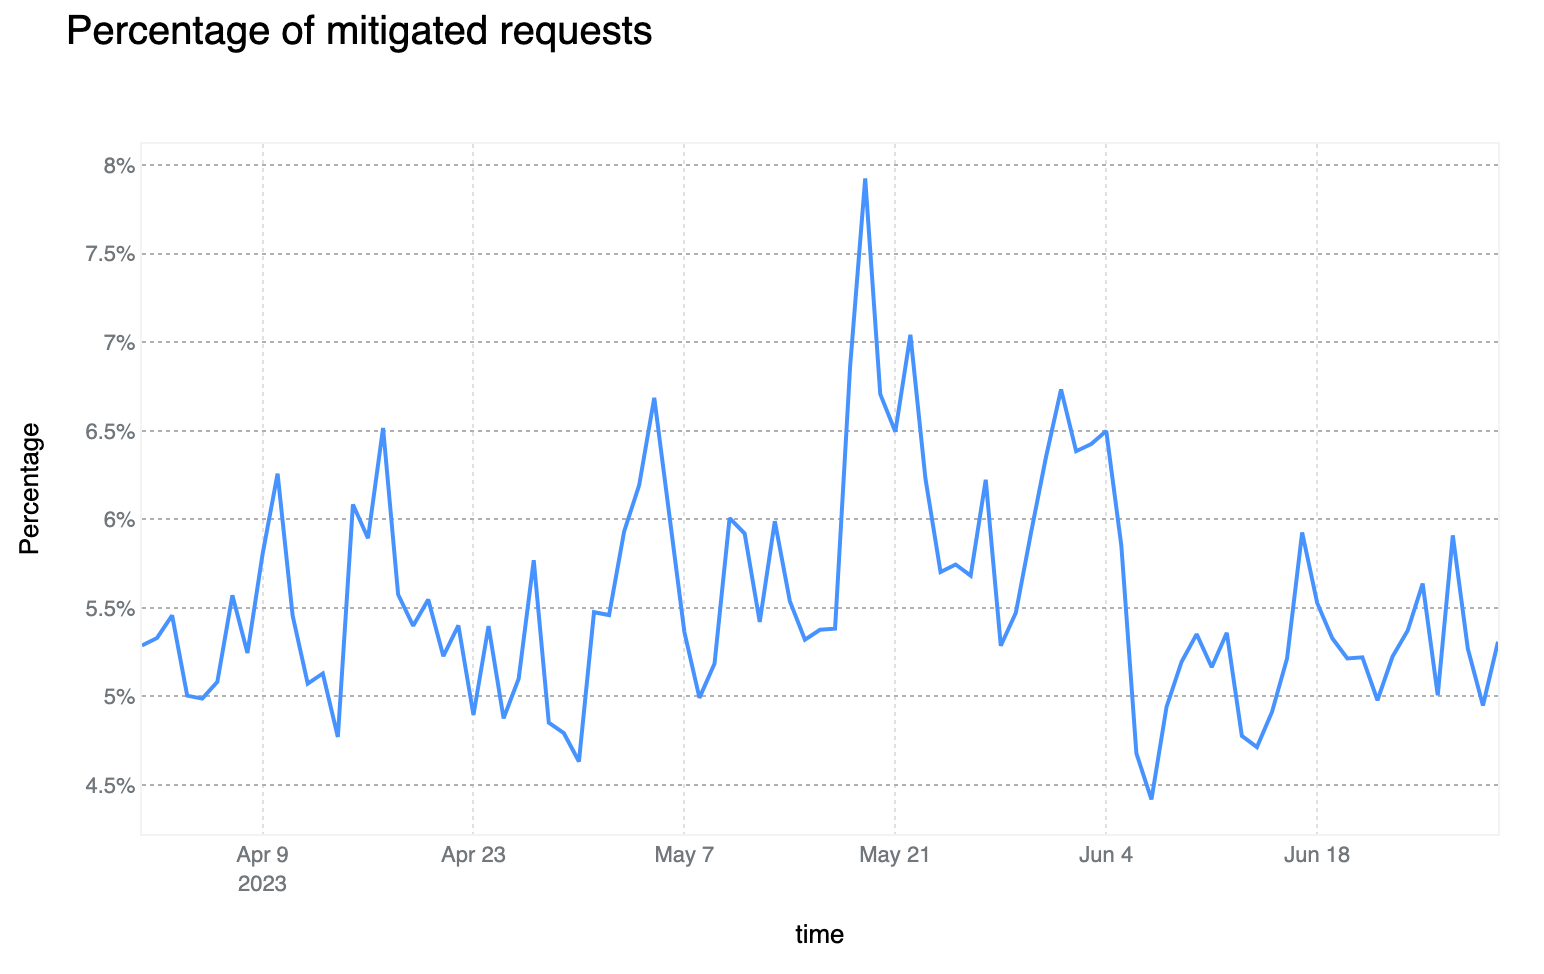 Percentage of mitigated HTTP requests from April 2023 to end of June 2023